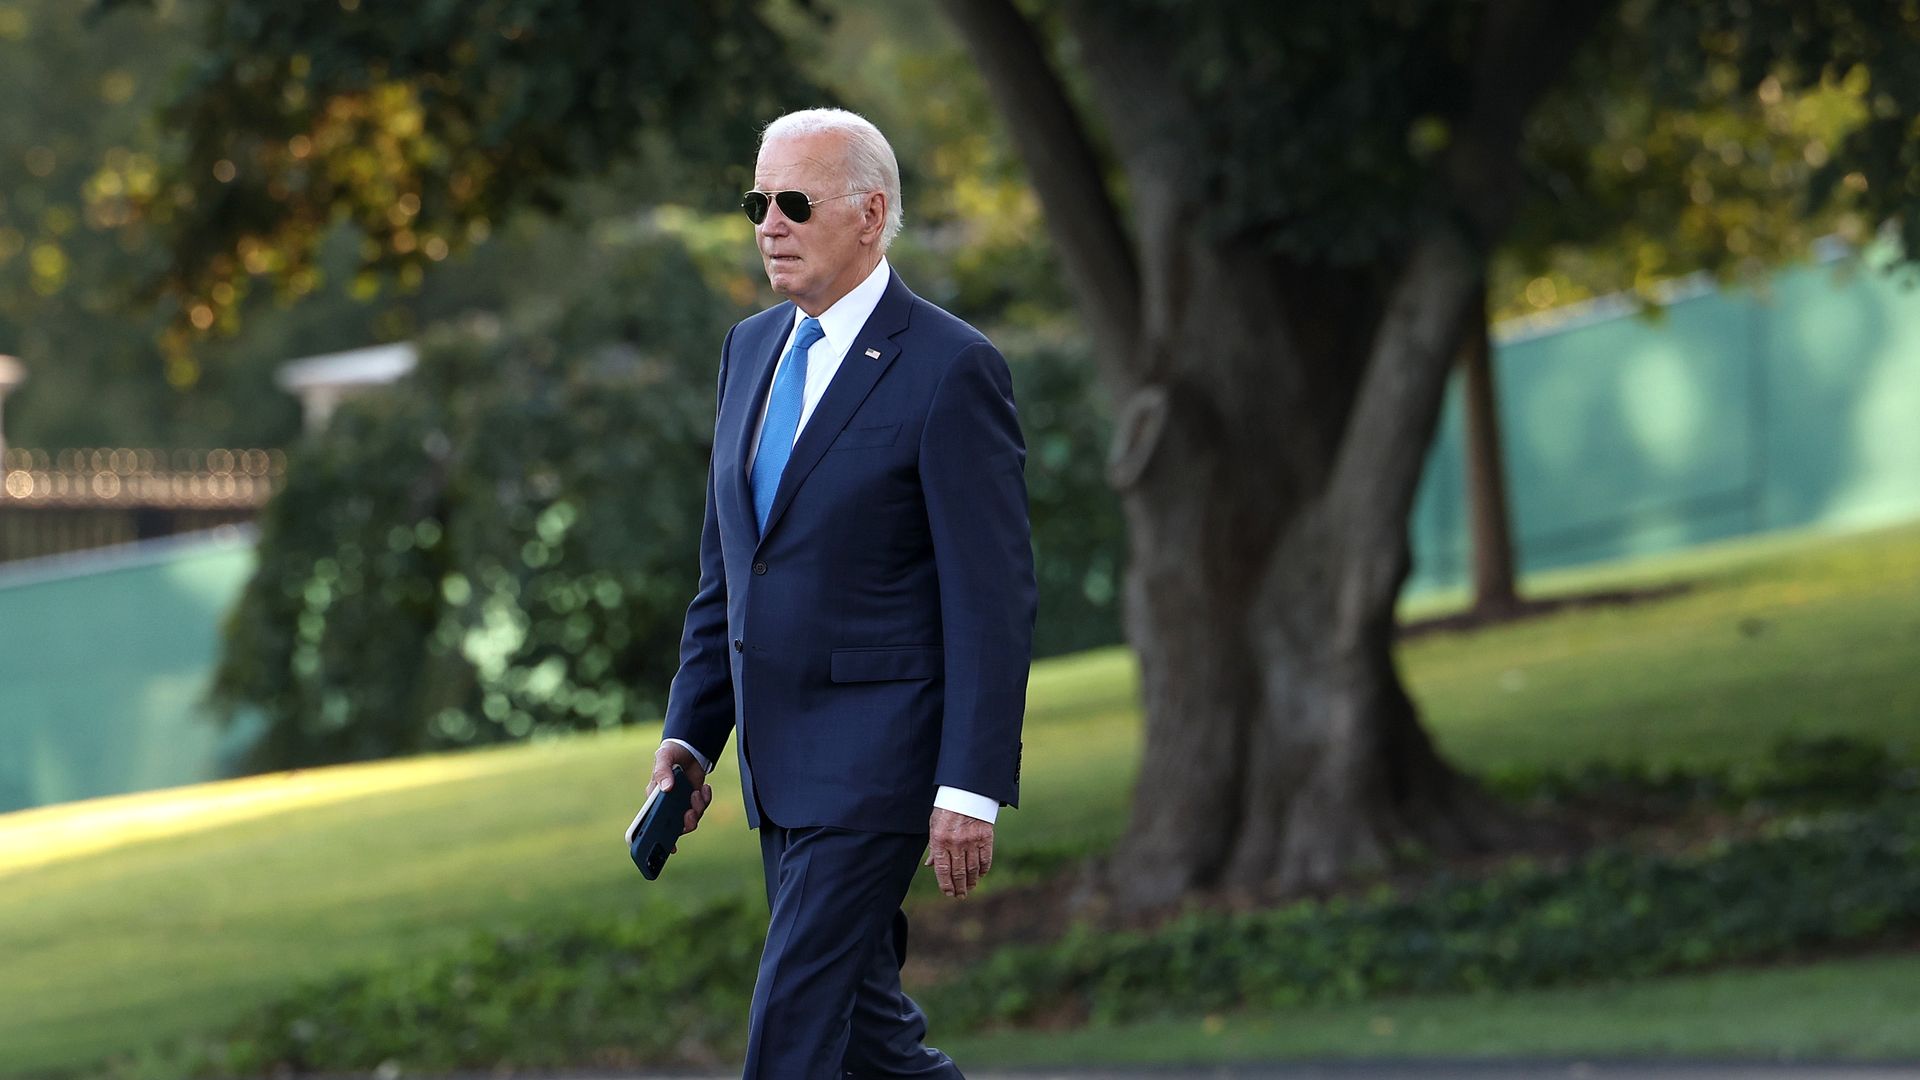 President Biden walks across the South Lawn of the White House, wearing a blue suit and sunglasses.